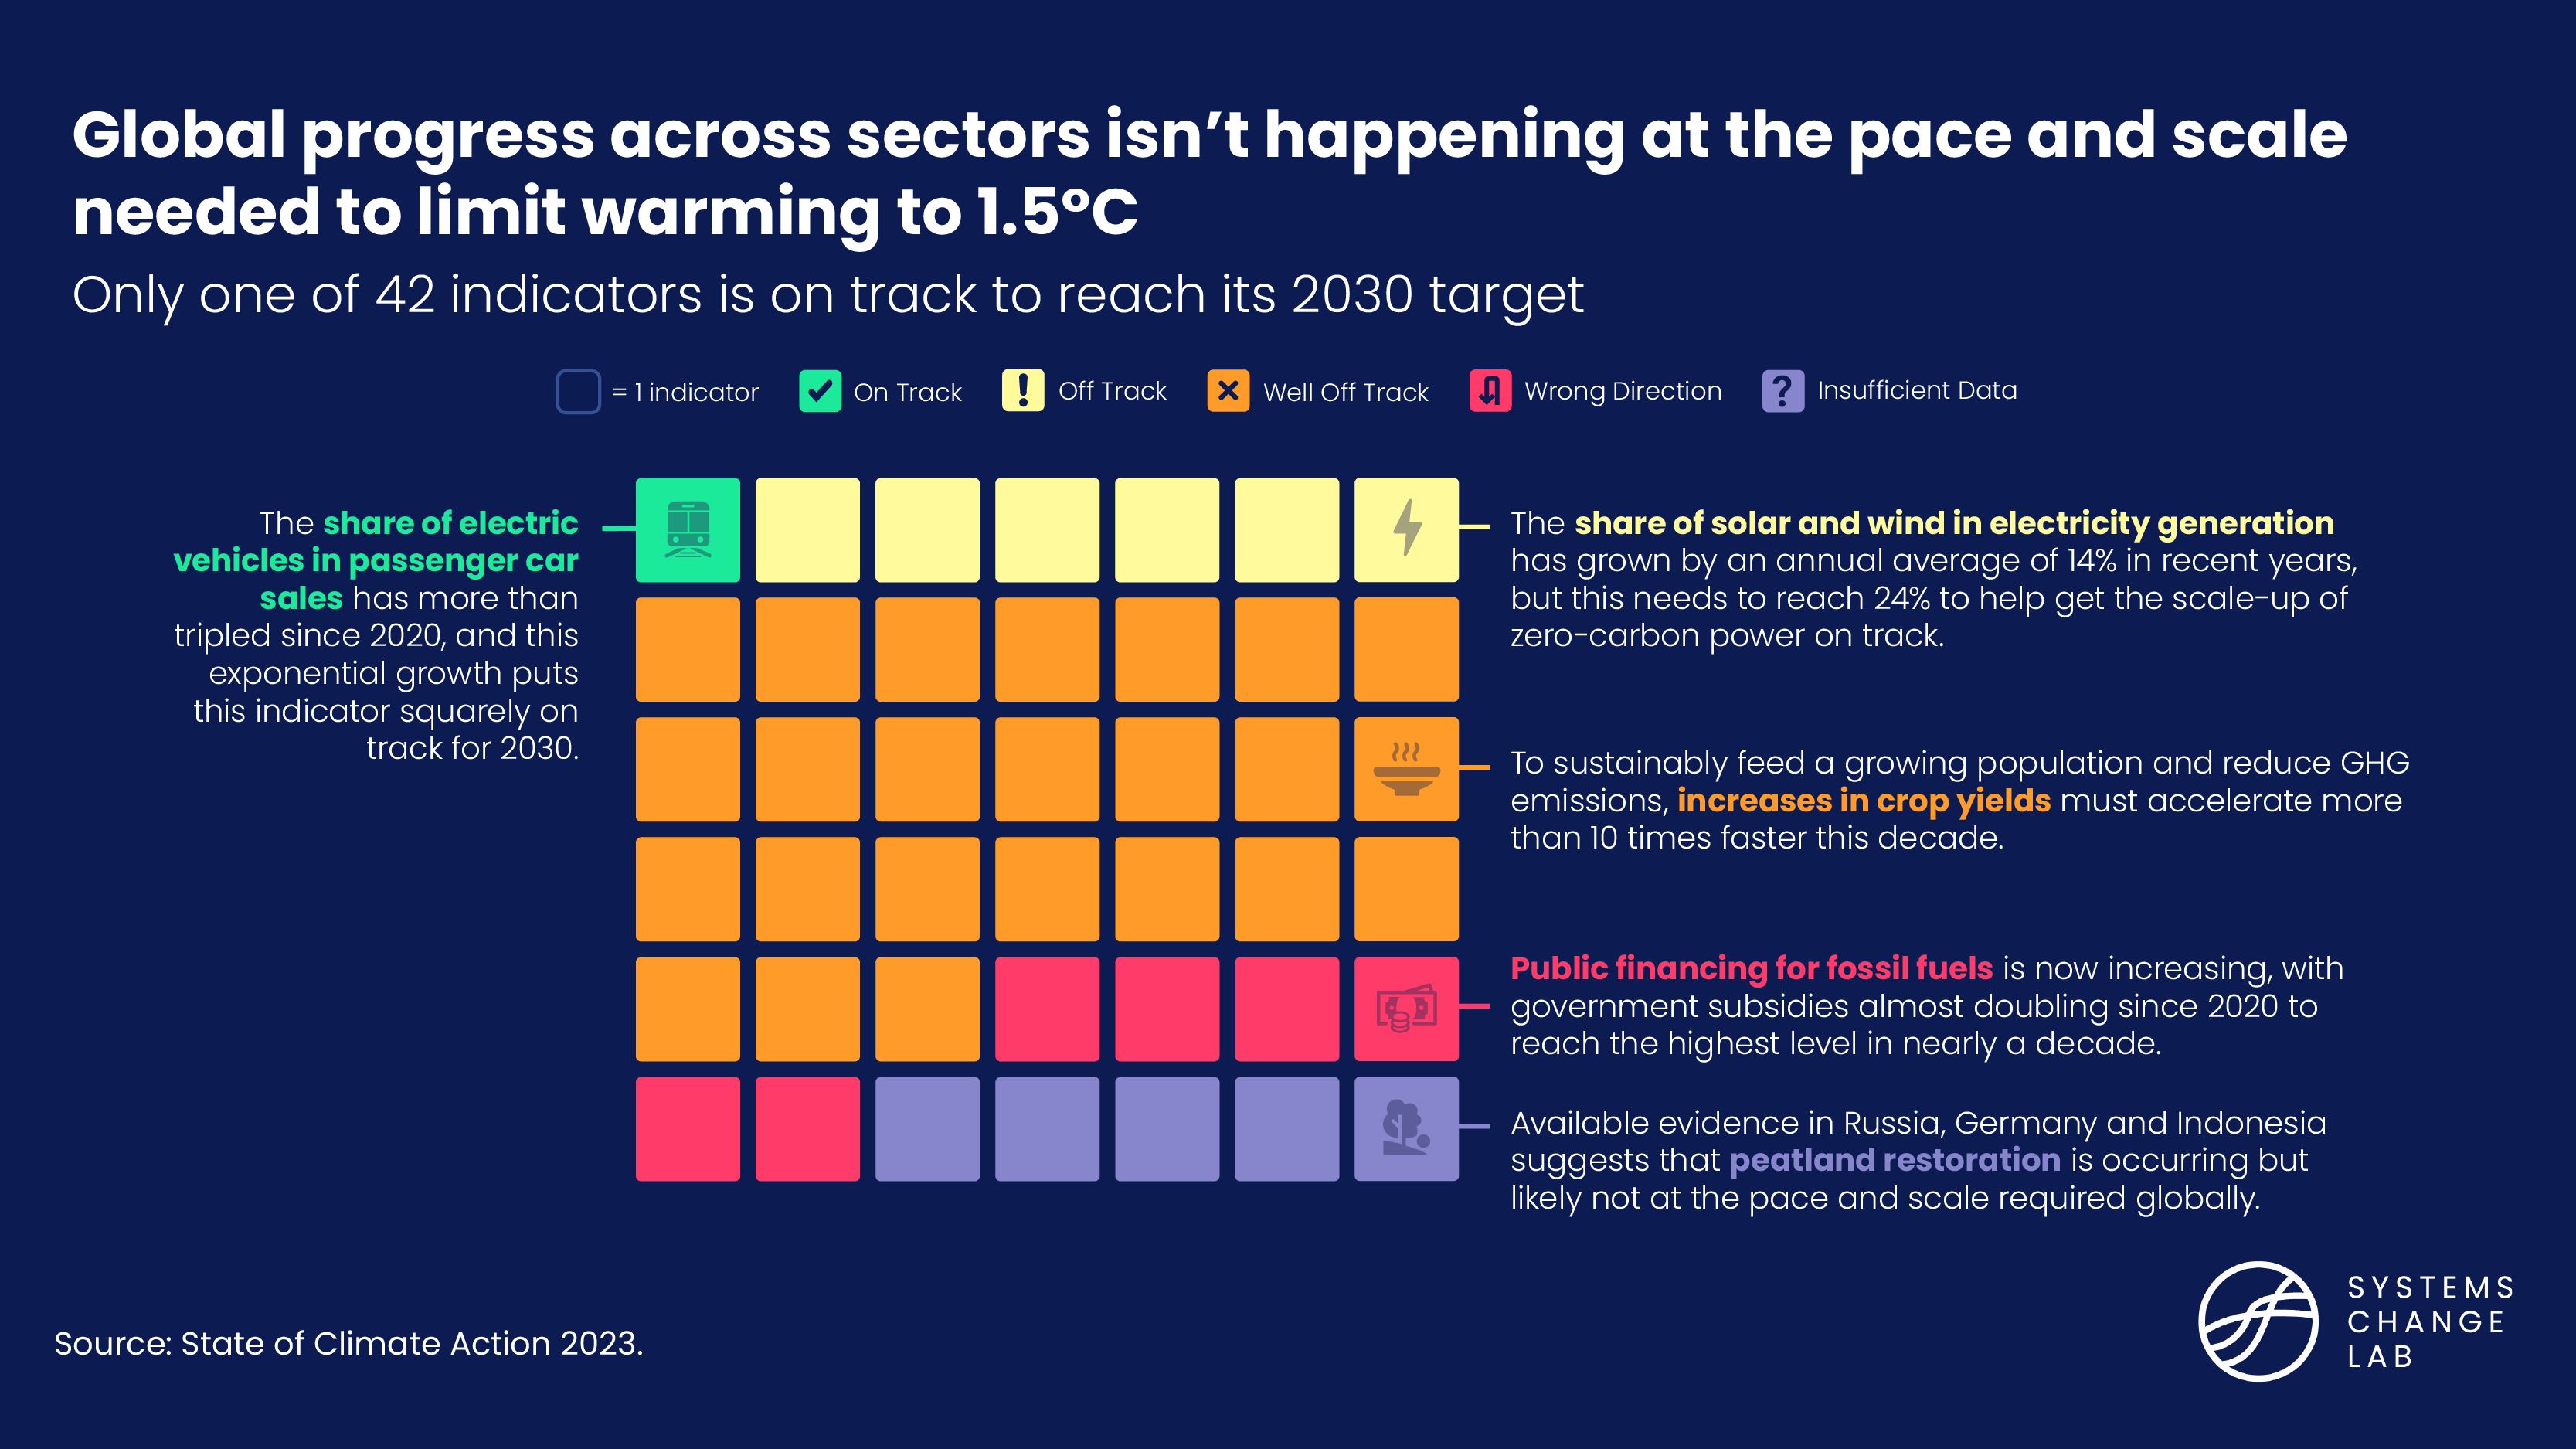 Global progress across sectors isn't happening at the pace and scale needed to limit warming to 1.5 degrees Celsius